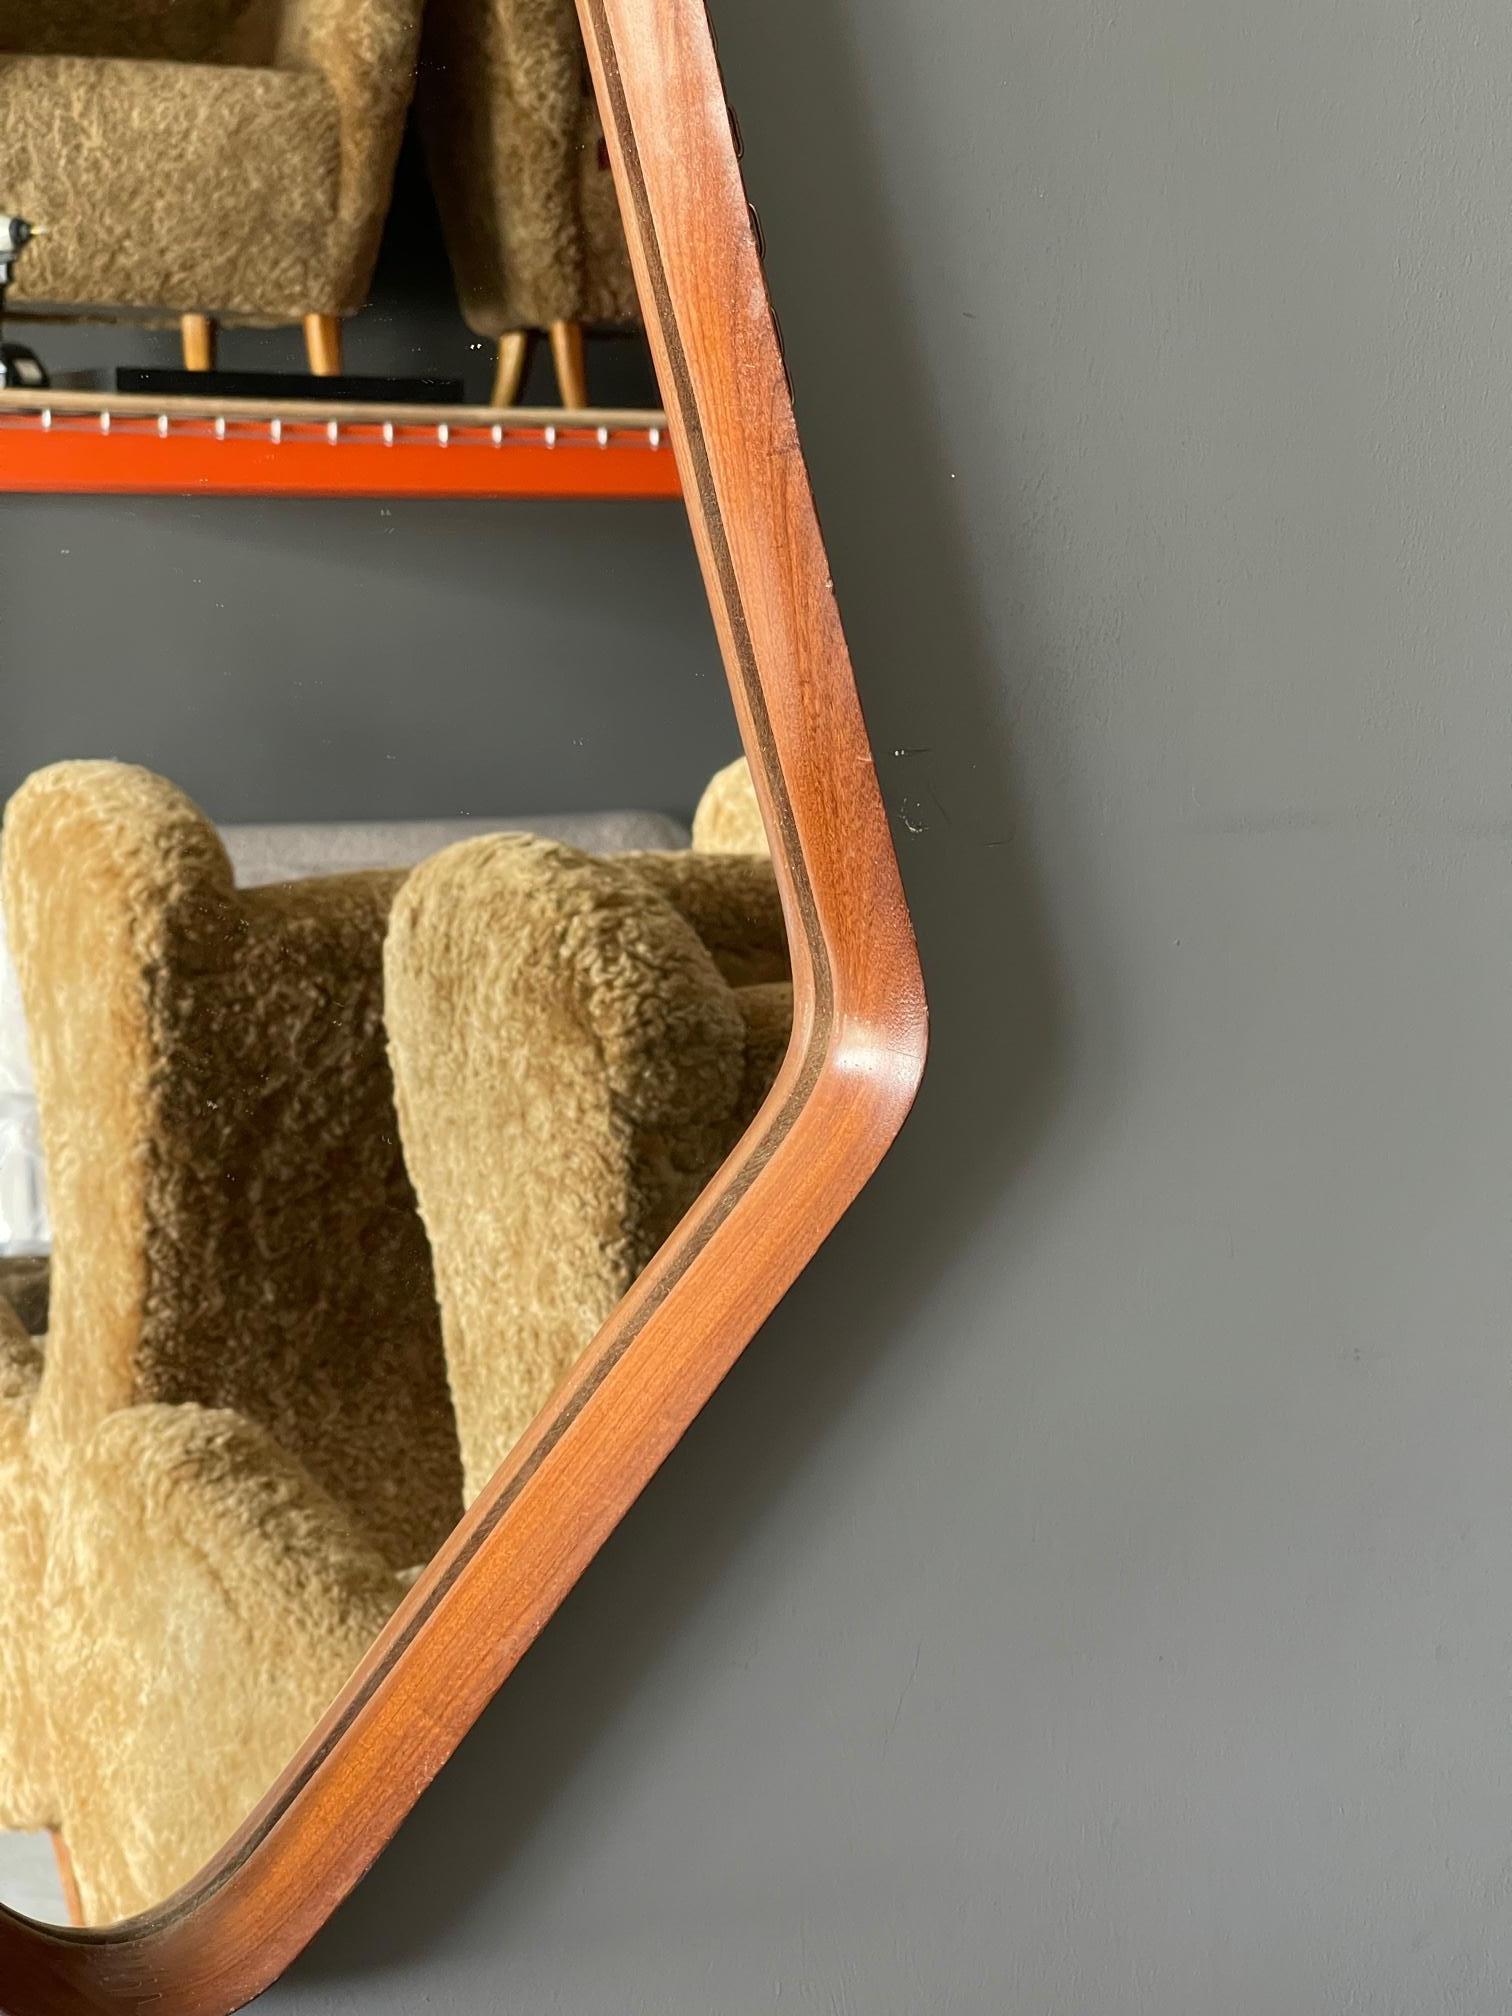 A wall mirror, produced in Italy, 1950s. Cut mirror glass is framed in finely carved walnut frame.

Other designers of the period include Gio Ponti, Fontana Arte, Paolo Buffa, Franco Albini, and Jean Royere.